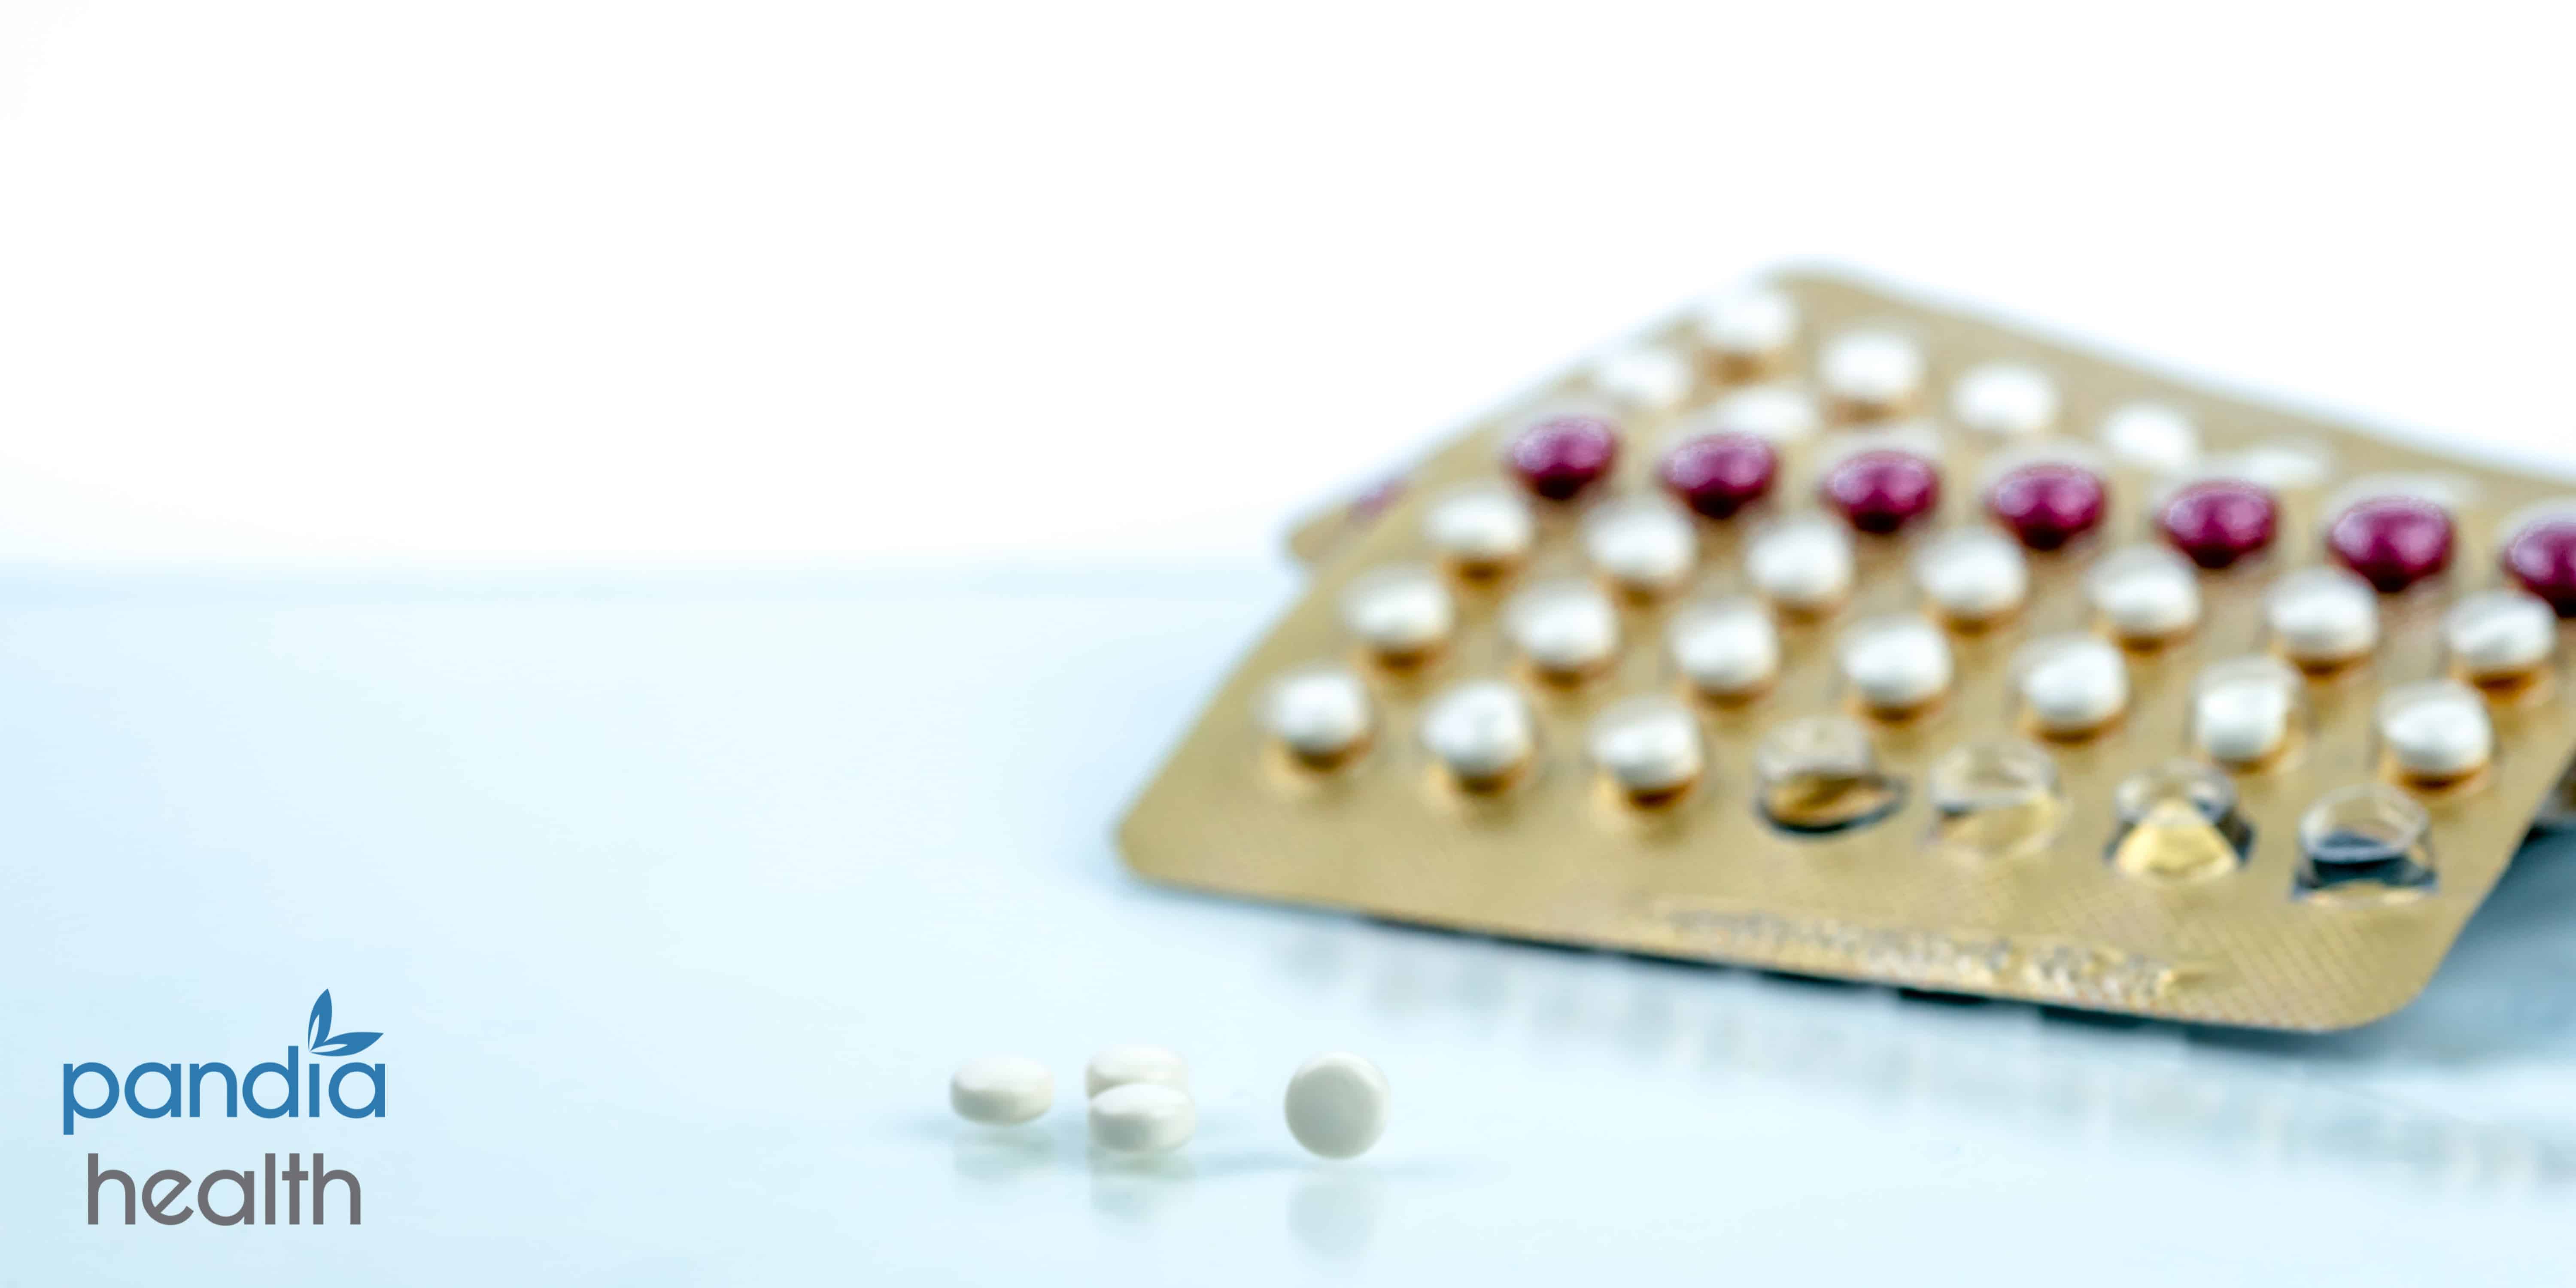 Birth Control & Your Insurance - What To Do Now